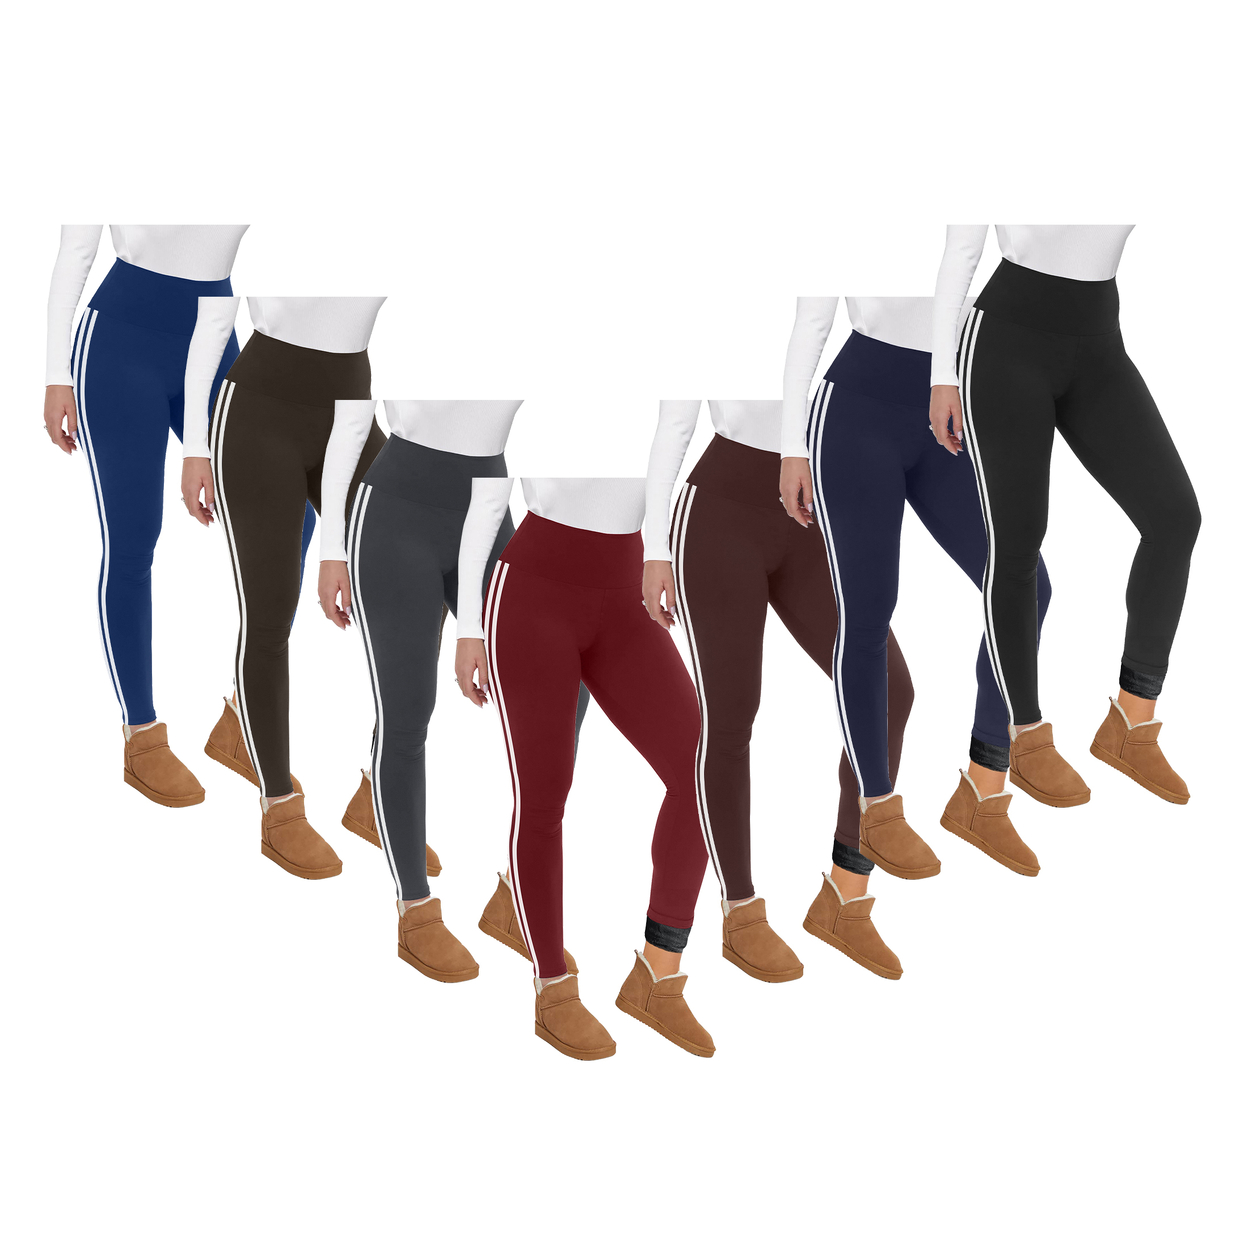 3-Pack: Women's Ultra Soft Winter Warm Cozy Striped Fur Lined Yoga Leggings - Assorted, Xx-large